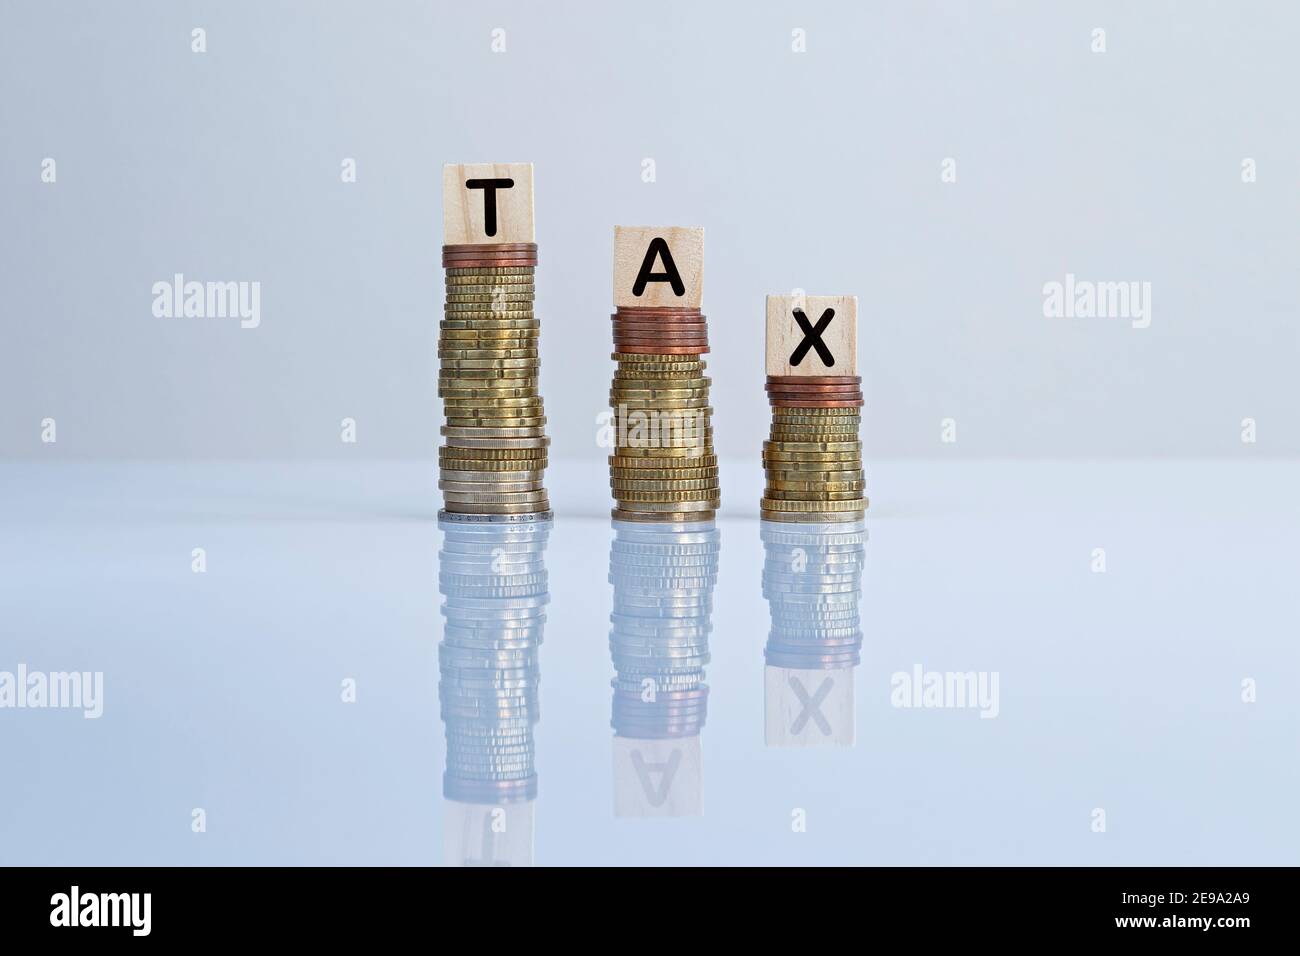 Word 'TAX' on wooden blocks on top of descending stacks of coins against gray background. Concept photo of tax cut, economy, business and finance. Stock Photo